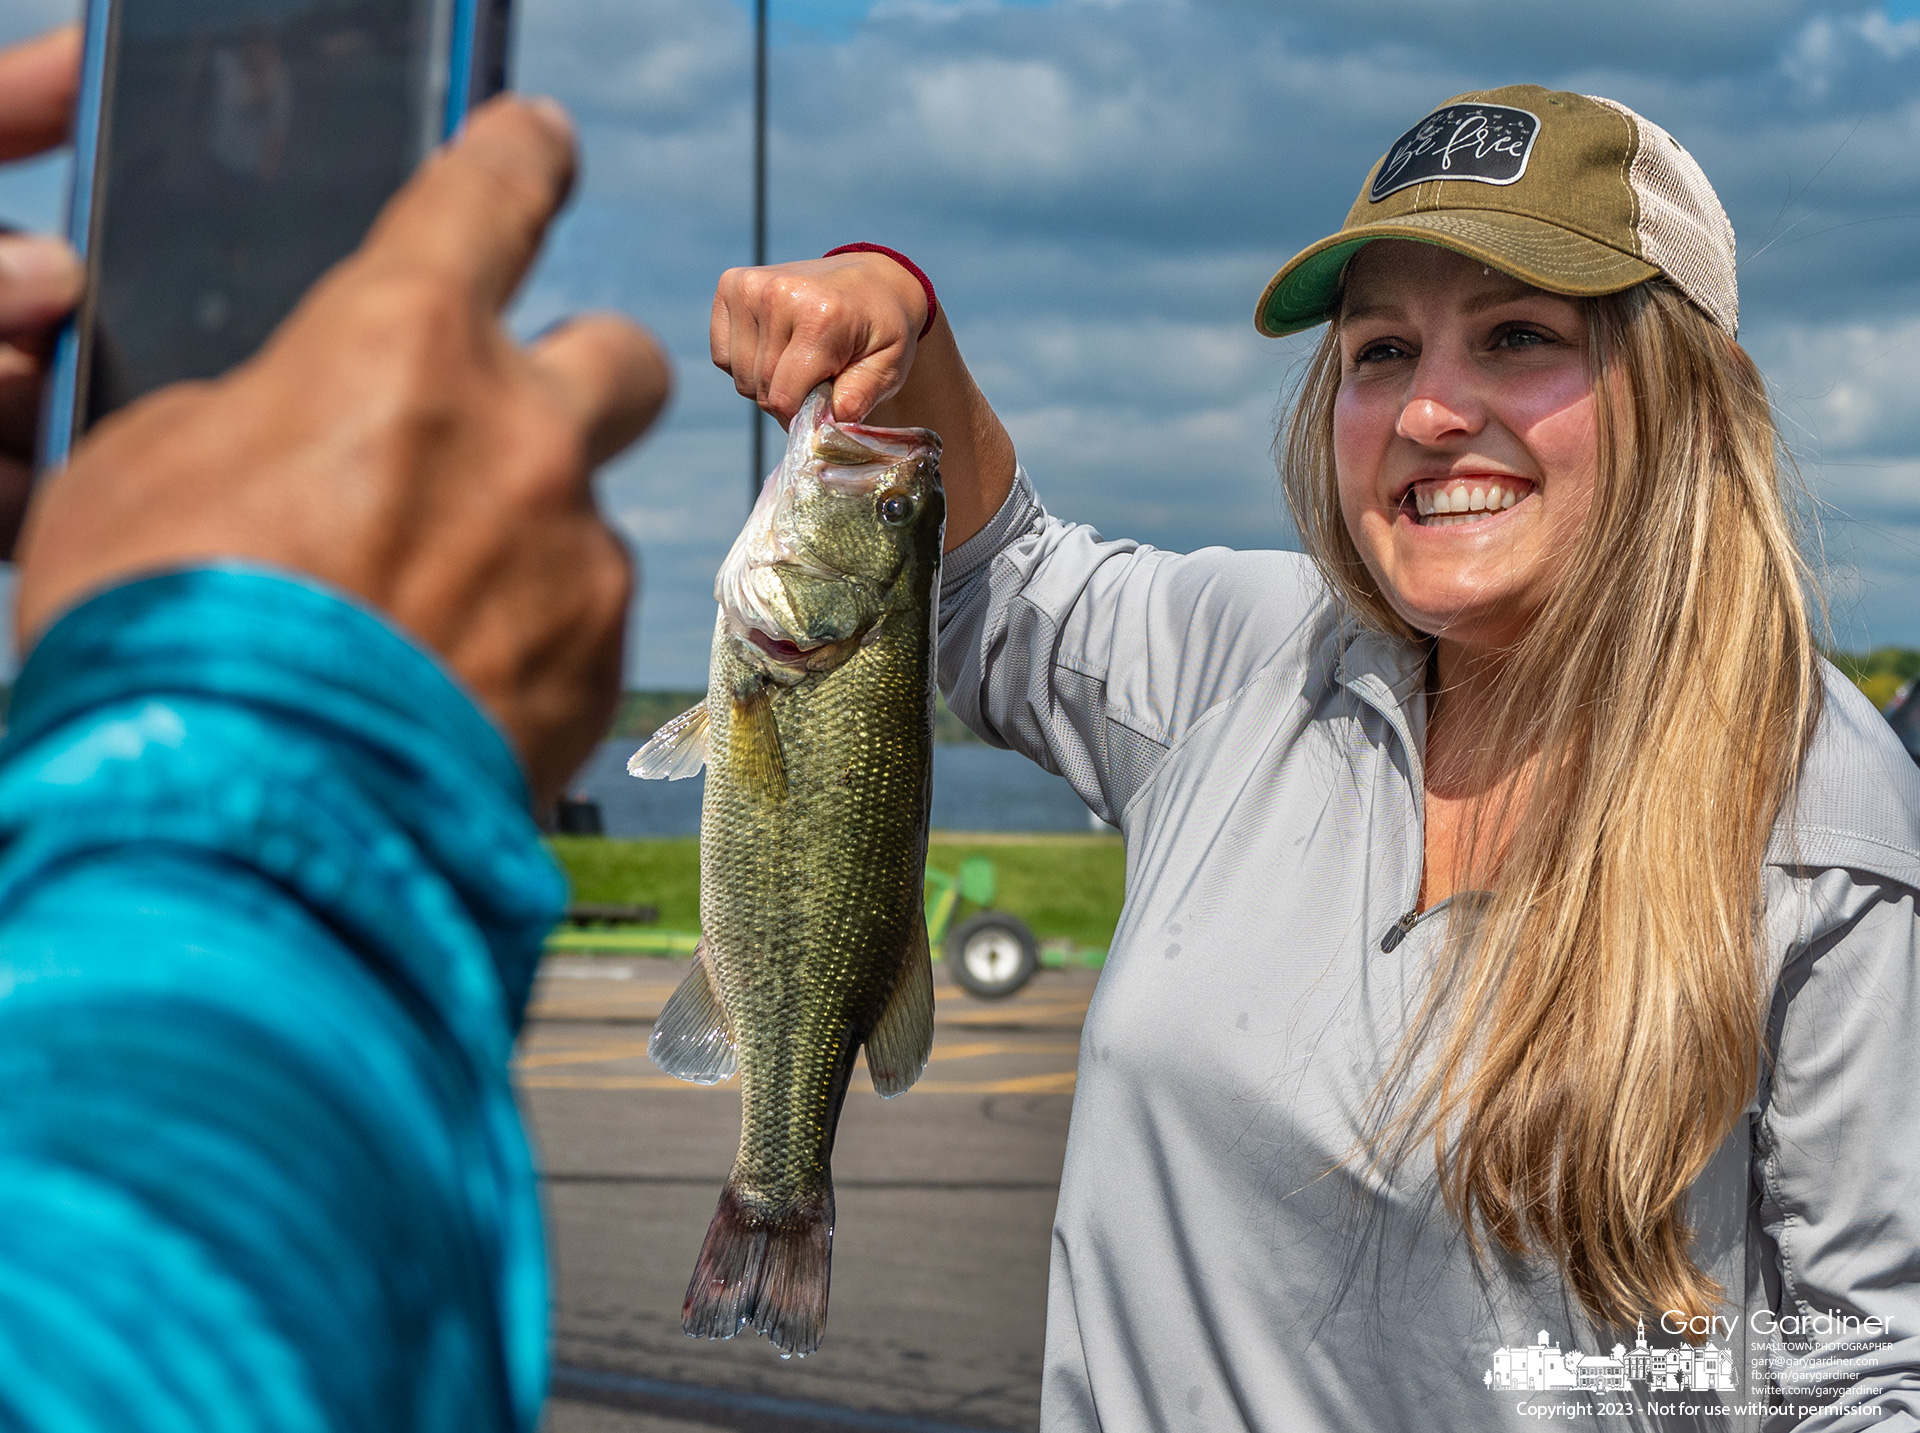 A proud stepfather takes a photo of his stepdaughter after what he said was her first successful smallmouth bass fishing competition success on Hoover Reservoir Sunday afternoon. My Final Photo for September 10, 2023.